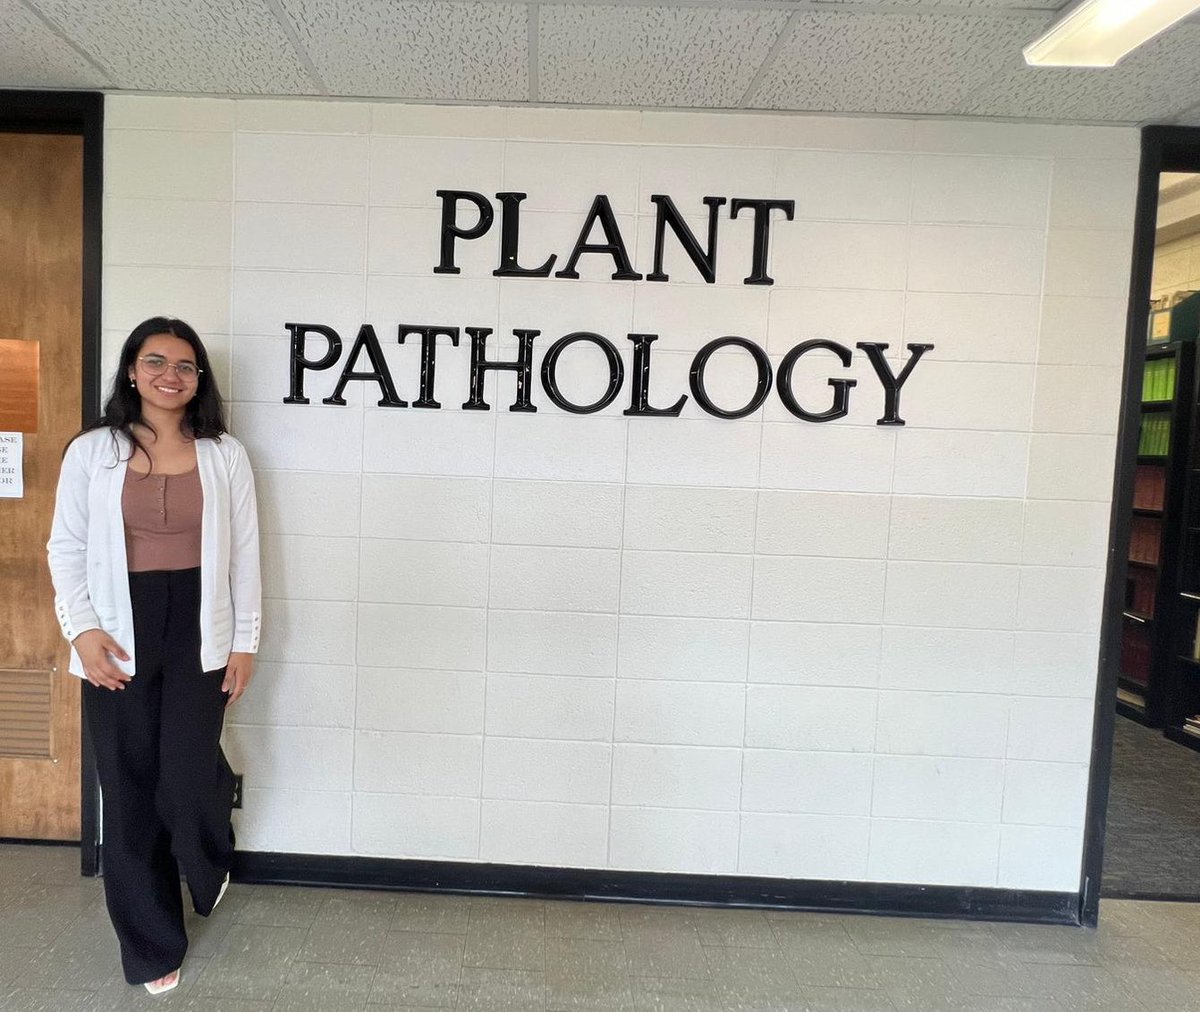 Thrilled to share that I successfully defended my M.S. thesis!🎓✨ Its been an incredible journey of research and growth. A huge thanks to my advisor Dr. Guiping Yan, Nematology lab team, my family and friends!! 
#MasterThesis #Nematodes #NDSUPlantPathology @NDSUPlantPath